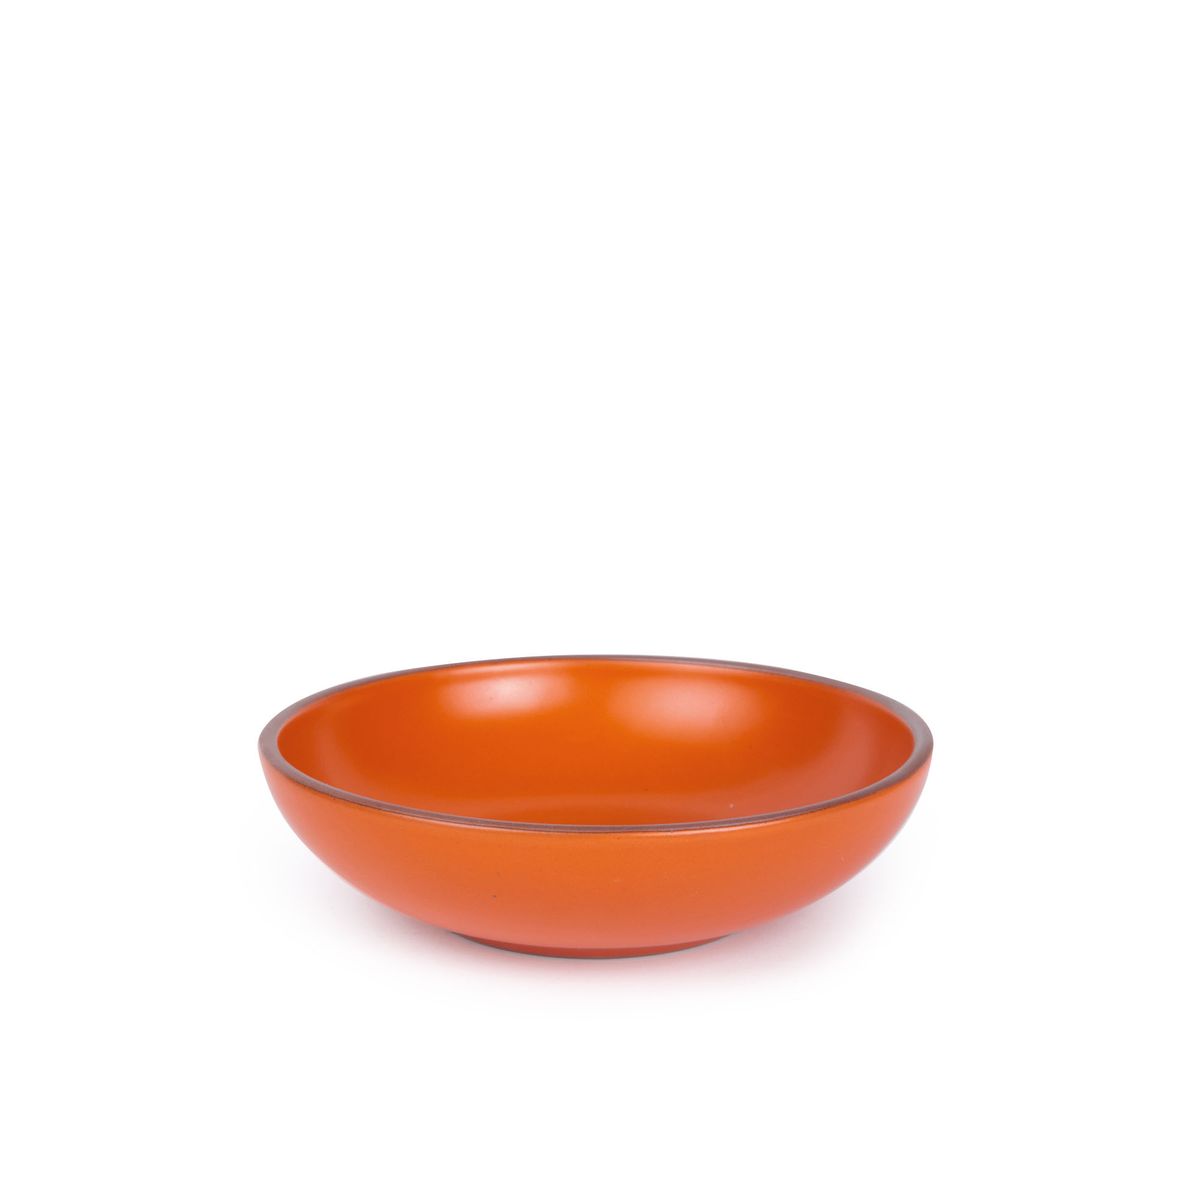 A dinner-sized shallow ceramic bowl in a bold orange color featuring iron speckles and an unglazed rim